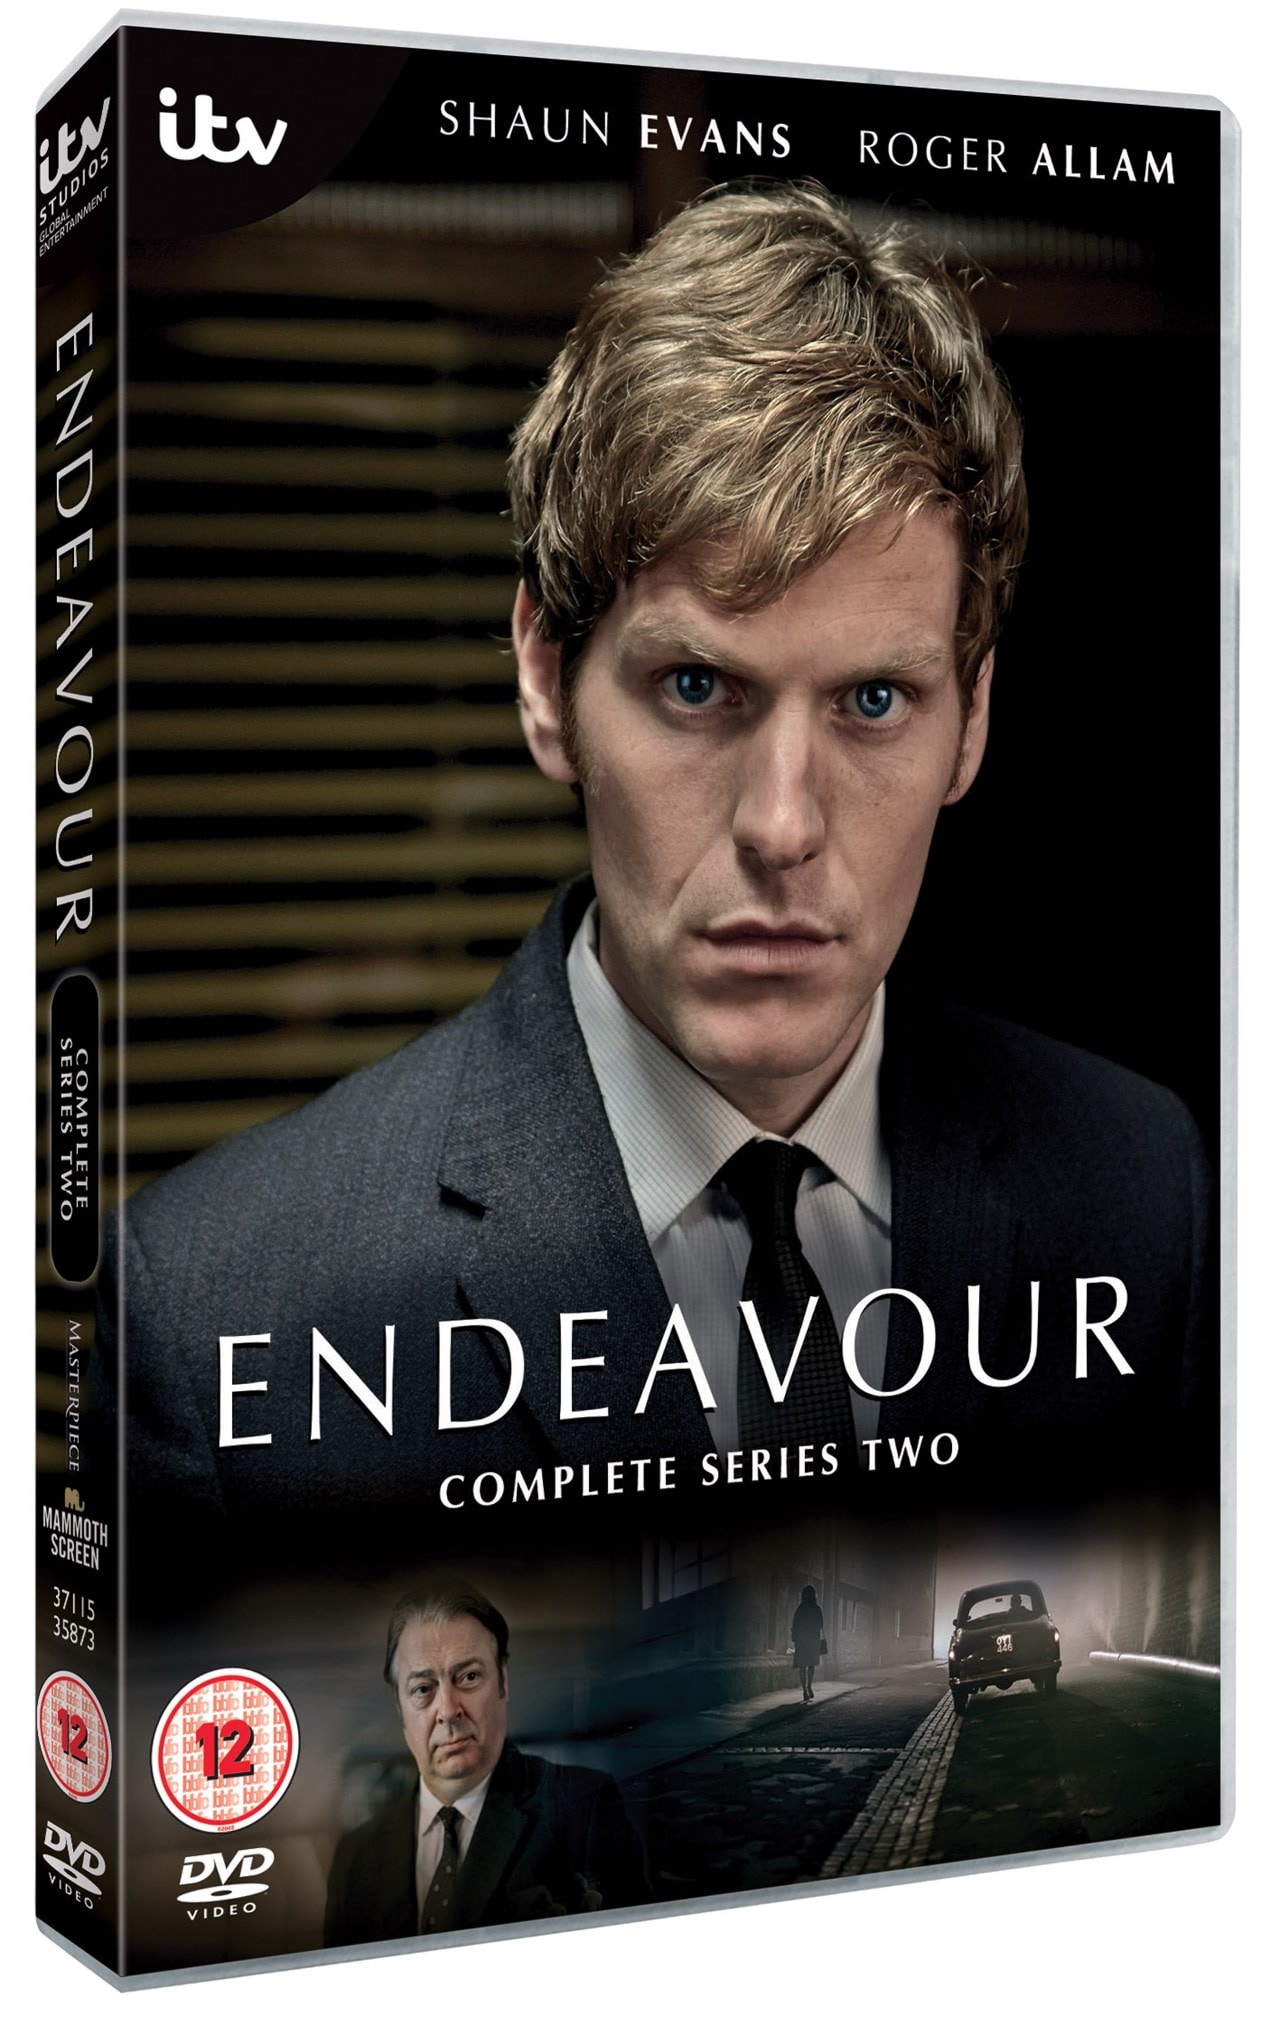 Endeavour: Complete Series Two | DVD | Free shipping over £20 | HMV Store